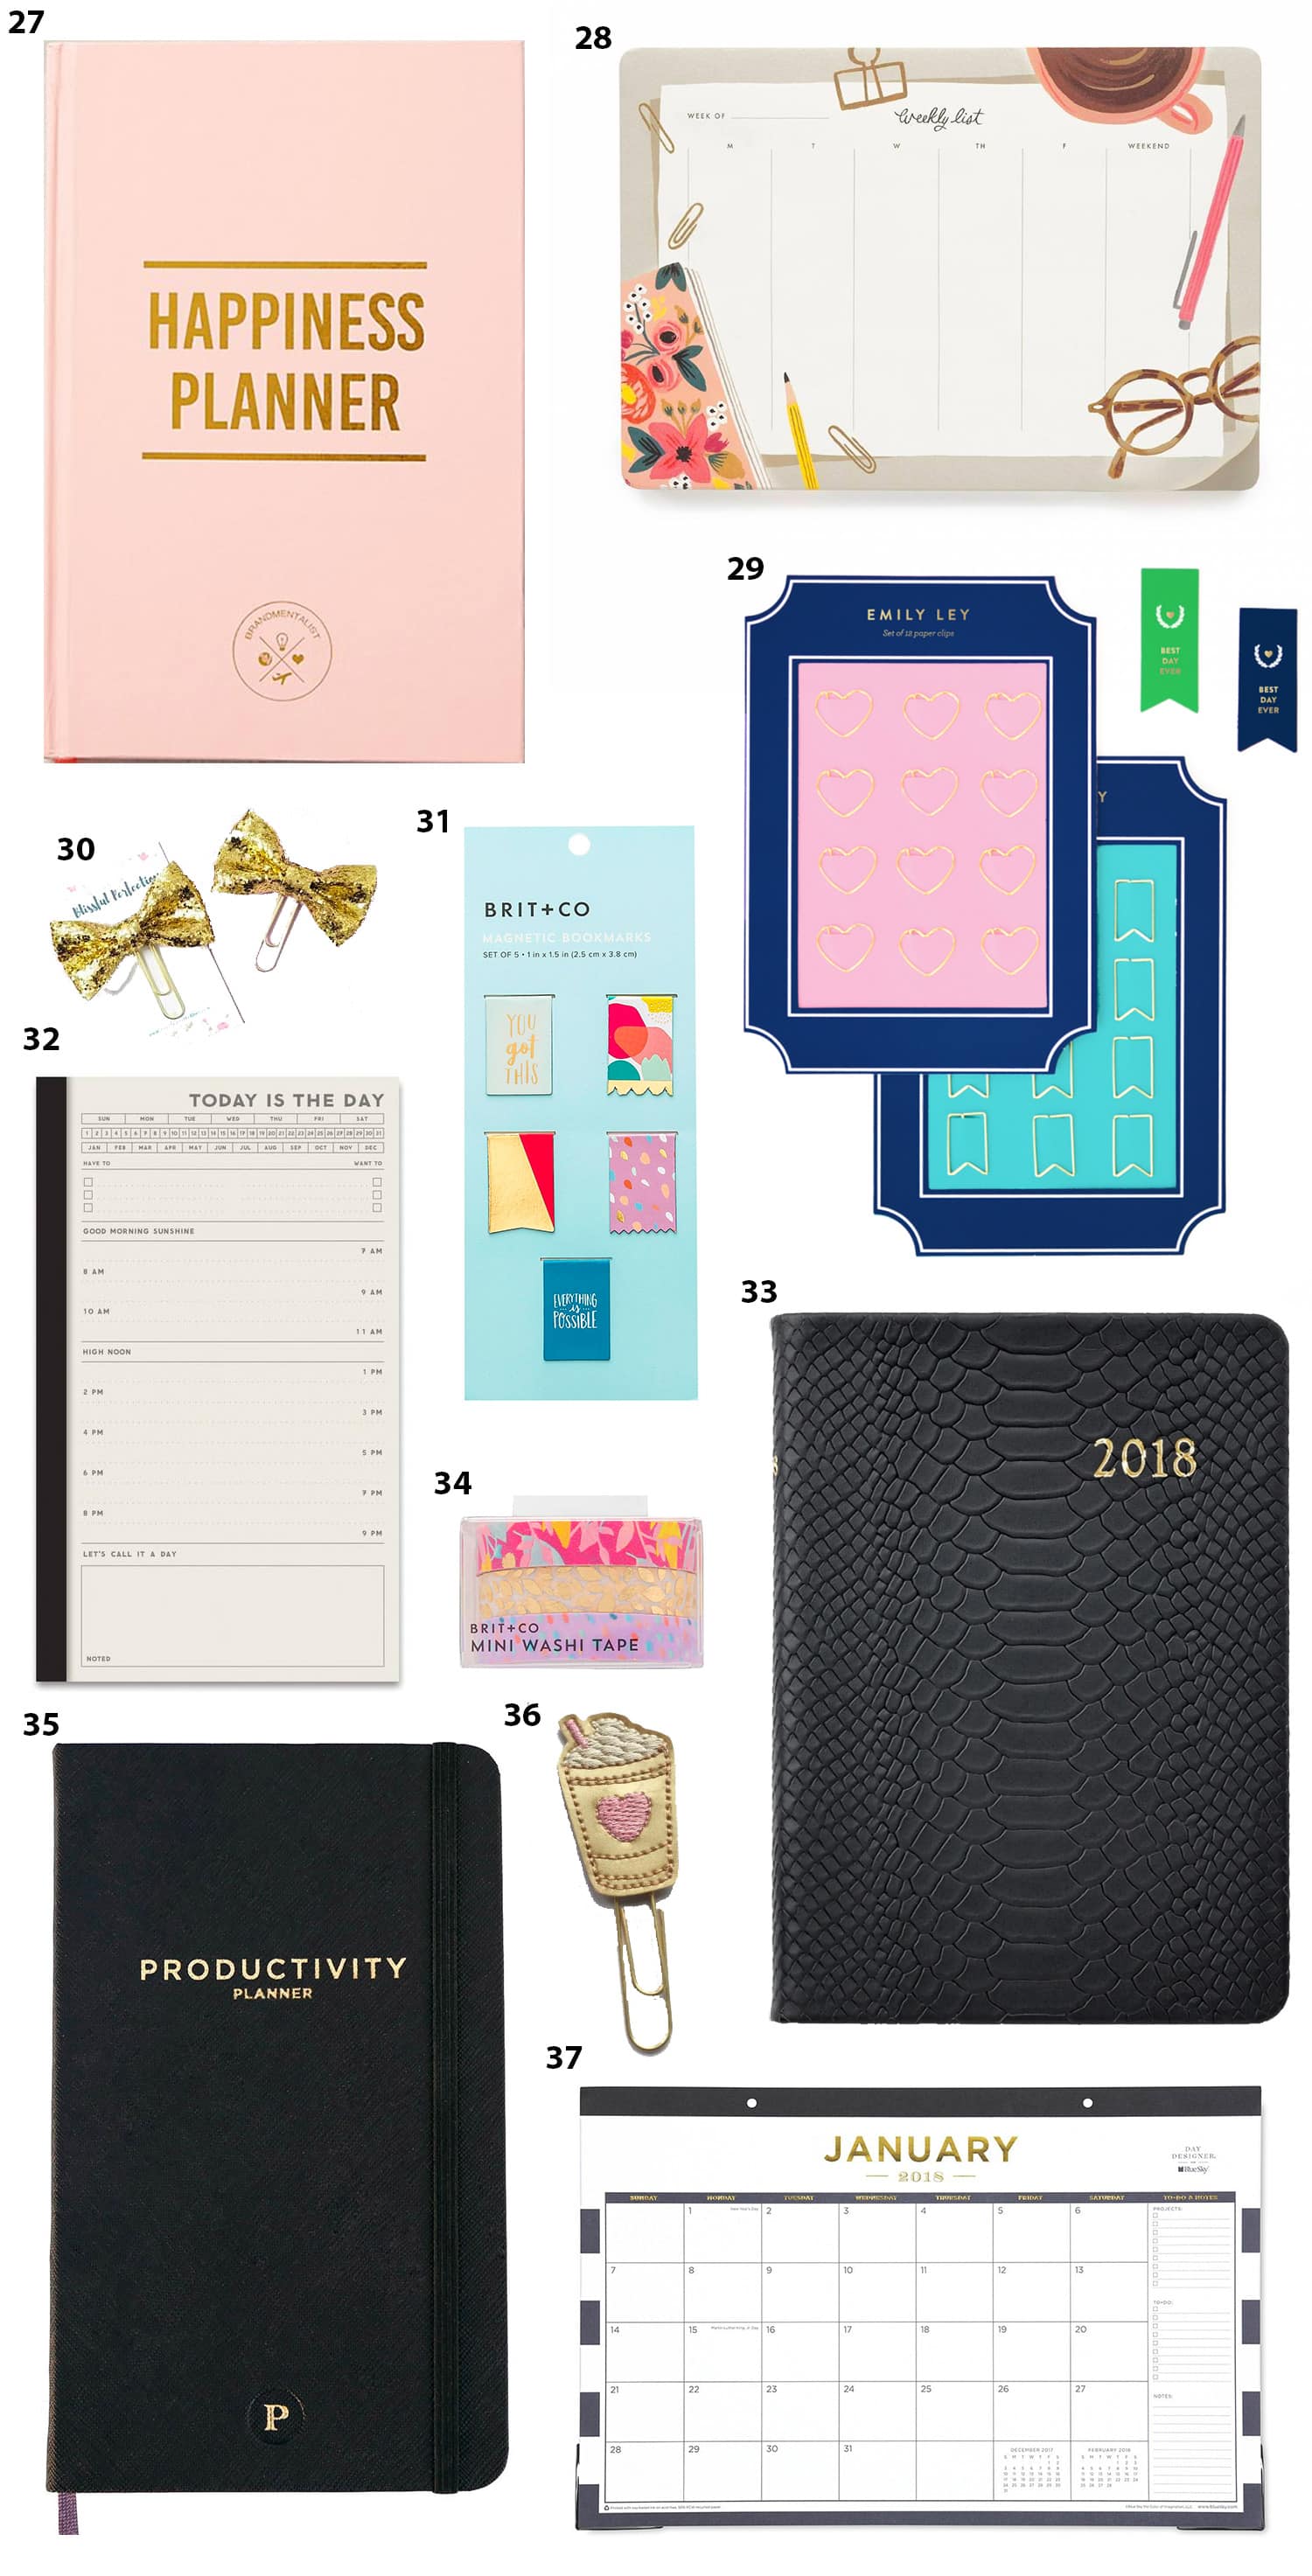 Cute Planners for 2018 | Organization planner | Cute planners | Planners for woman | Ashley Brooke Nicholas